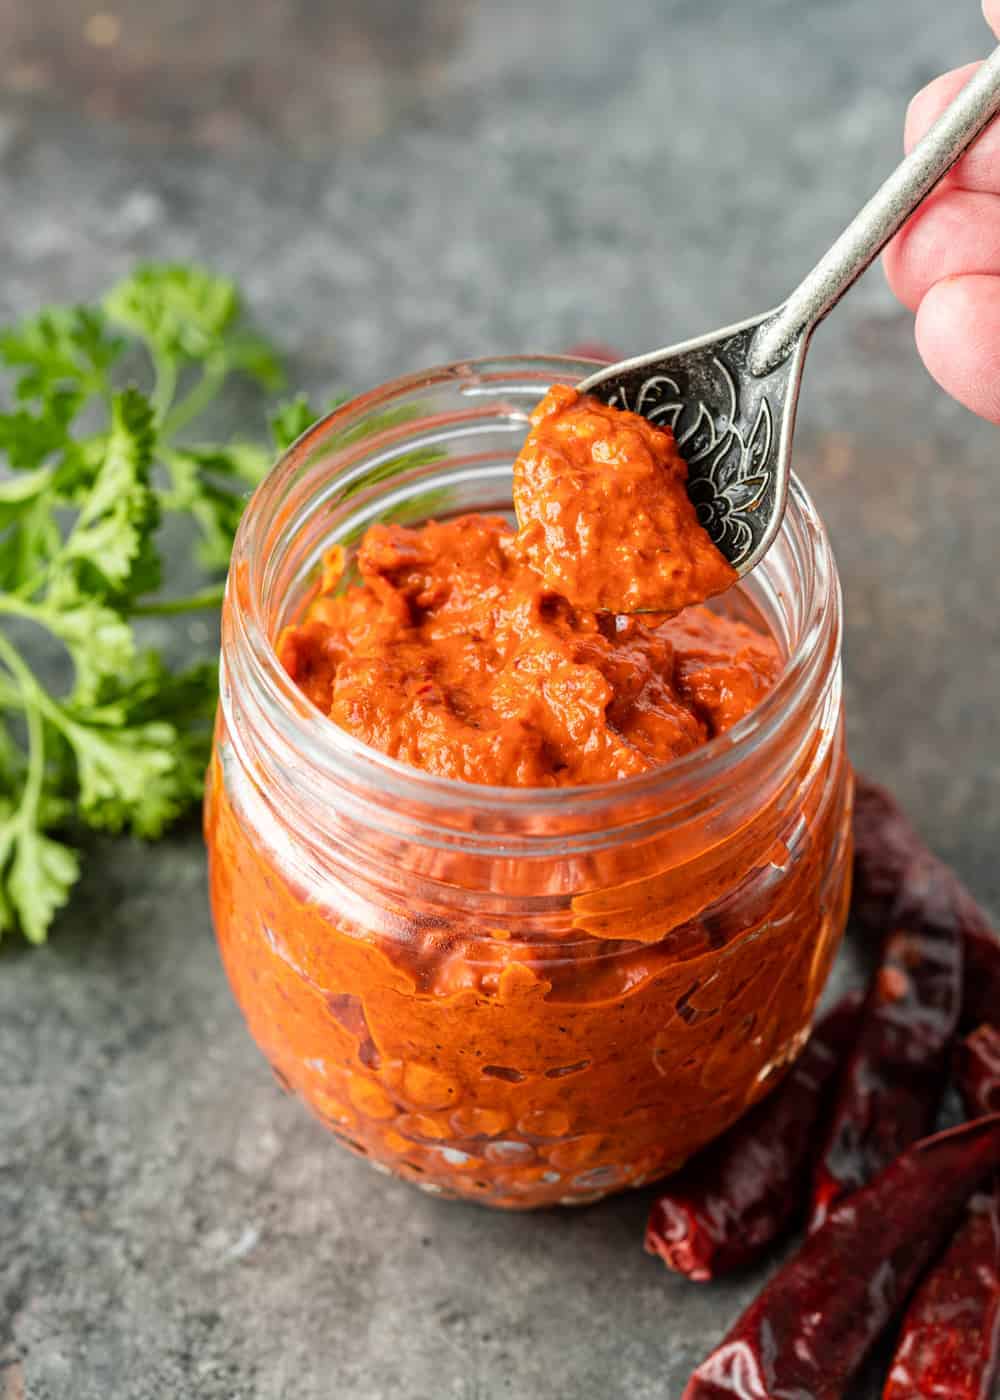 spoonful of red chili paste over jar